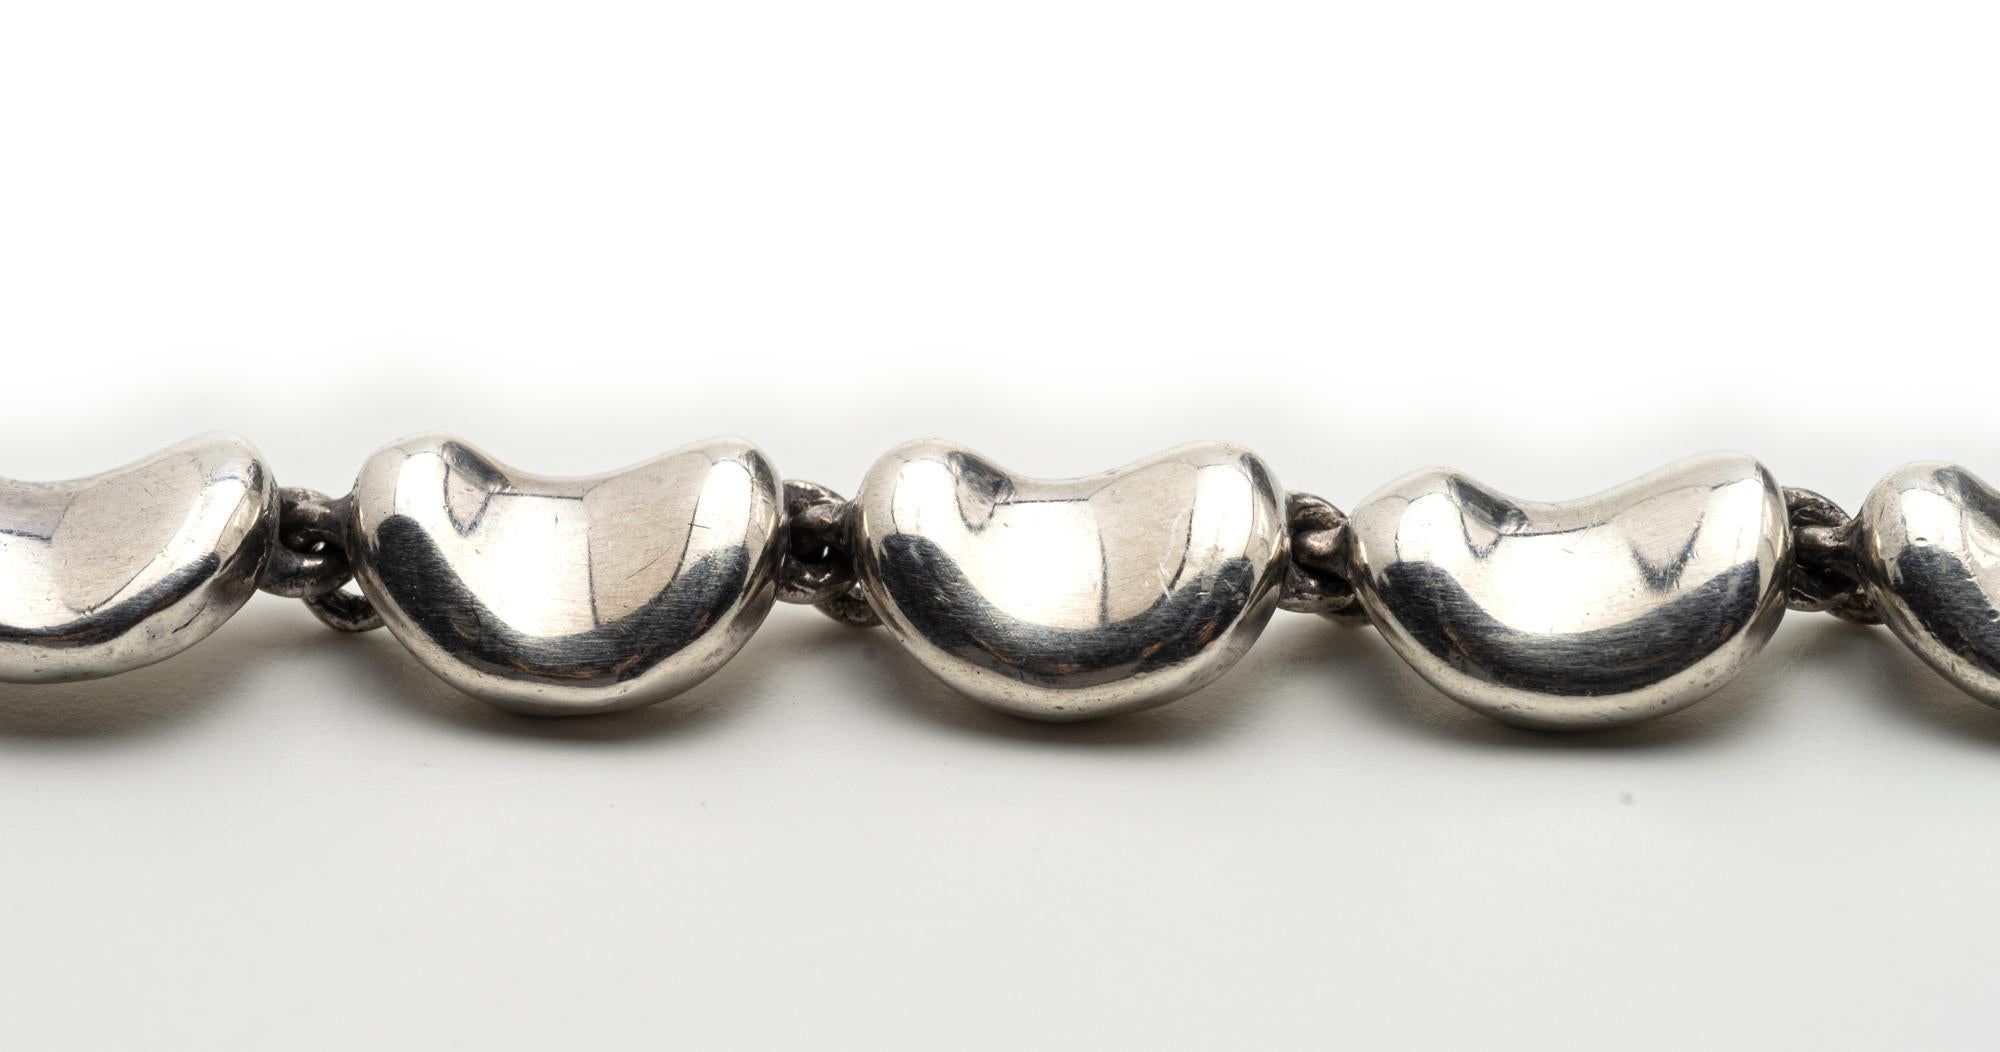 Elsa Peretti for Tiffany & Co.
A sterling silver bracelet, designed as a series of undulating silver links, total gross weight approximately 21.7 grams, length 6 1/4 inches, signed Tiffany & Co. Peretti